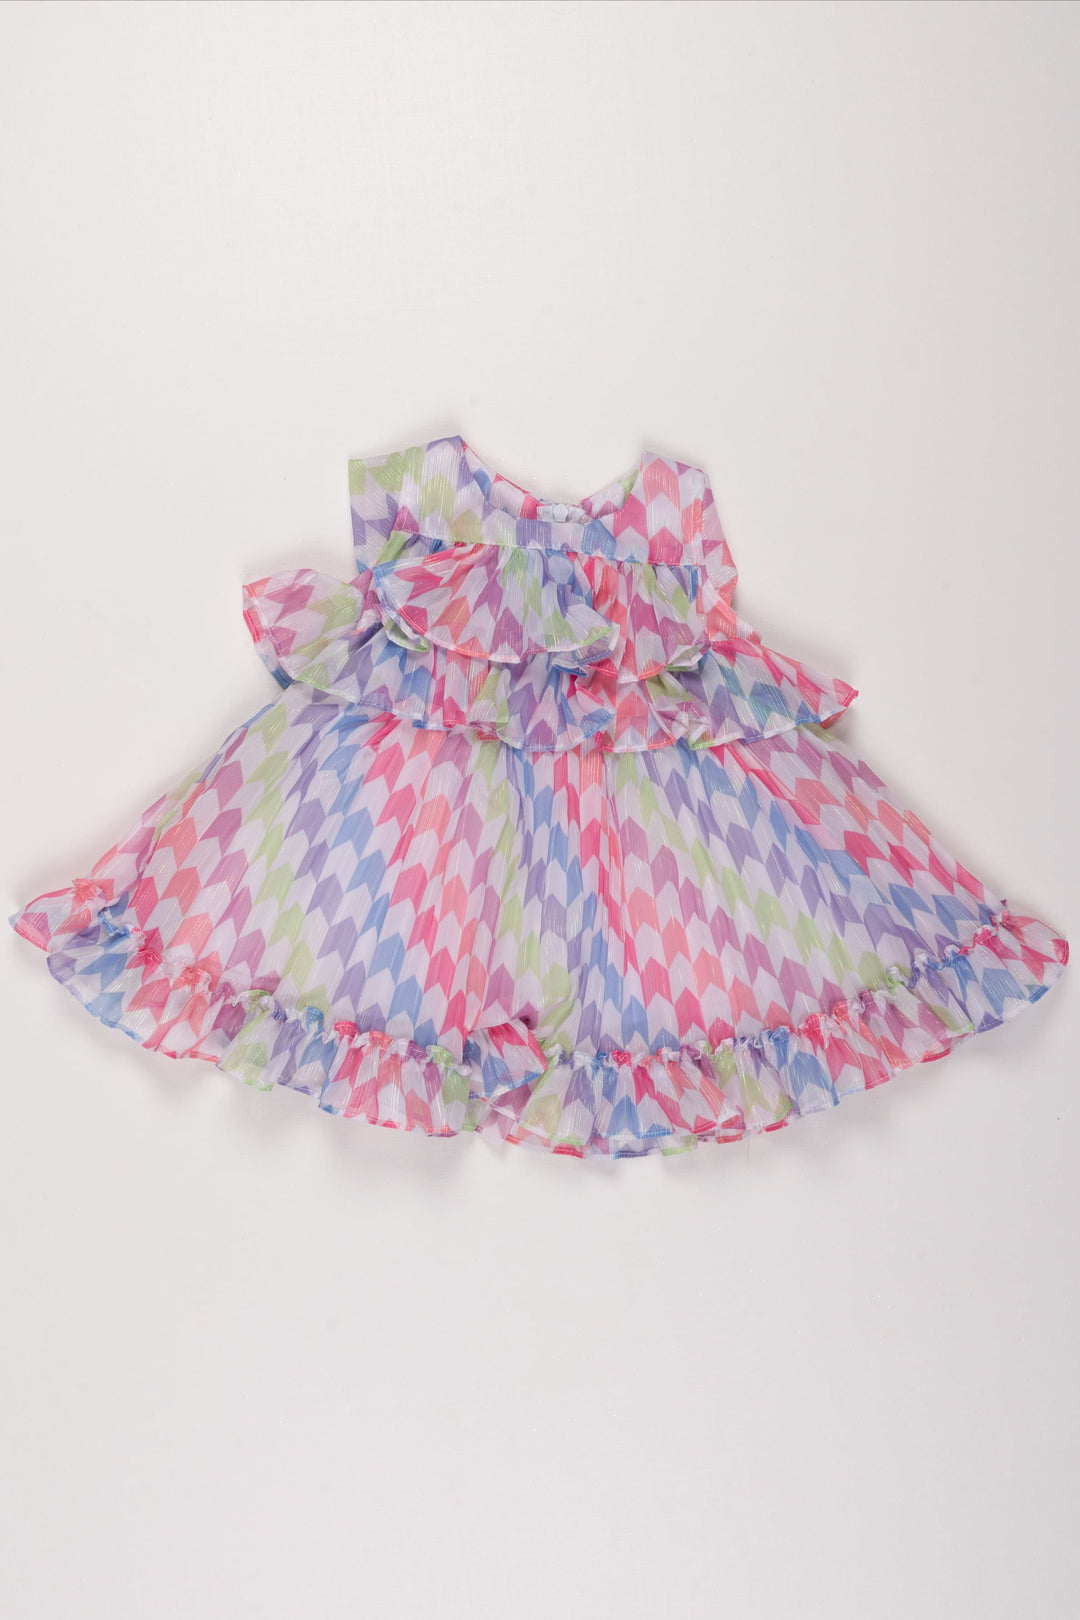 The Nesavu Baby Fancy Frock Infant Girl's Colorful Chevron Tiered Frock with Ruffle Accents - Ideal for Festivities Nesavu 12 (3M) / multicolor BFJ503B-12 Colorful Chevron Tiered Frock for Infants | Playful Summer Dress | The Nesavu